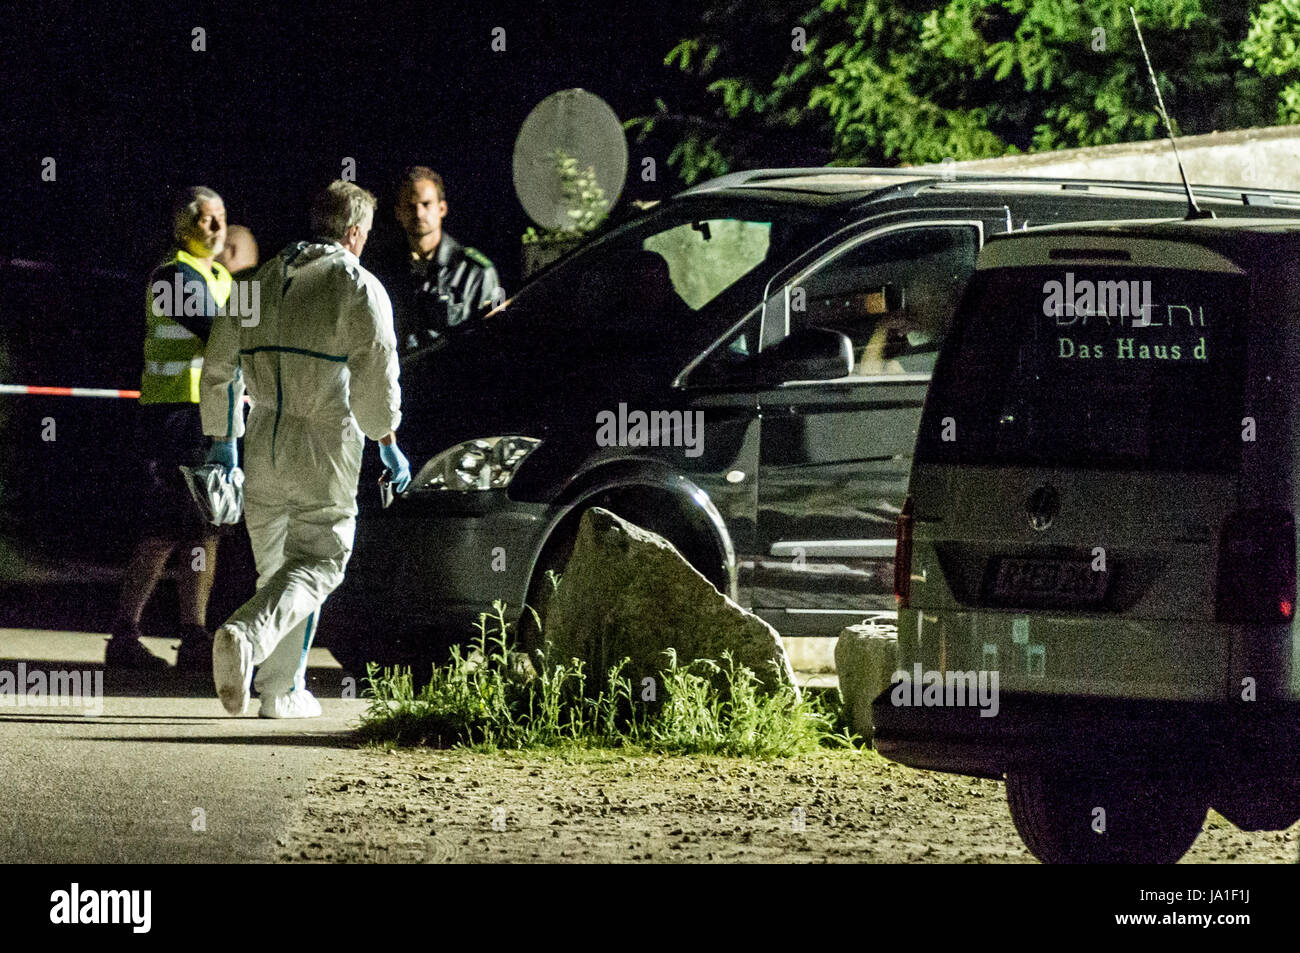 Arnschwang, Germany. 3rd June, 2017. Police officers stand on the premises of an asylum home near Arnschwang, Germany, 3 June 2017. Two people died in a dramatic incident at a home for asylum applicants on Saturday. A 41-year-old man from Afghanistan captured a five-year-old boy from Russia and injured him fatally. The officers called to the location shot the Afghan and hit him fatally. Photo: Armin Weigel/dpa/Alamy Live News Stock Photo